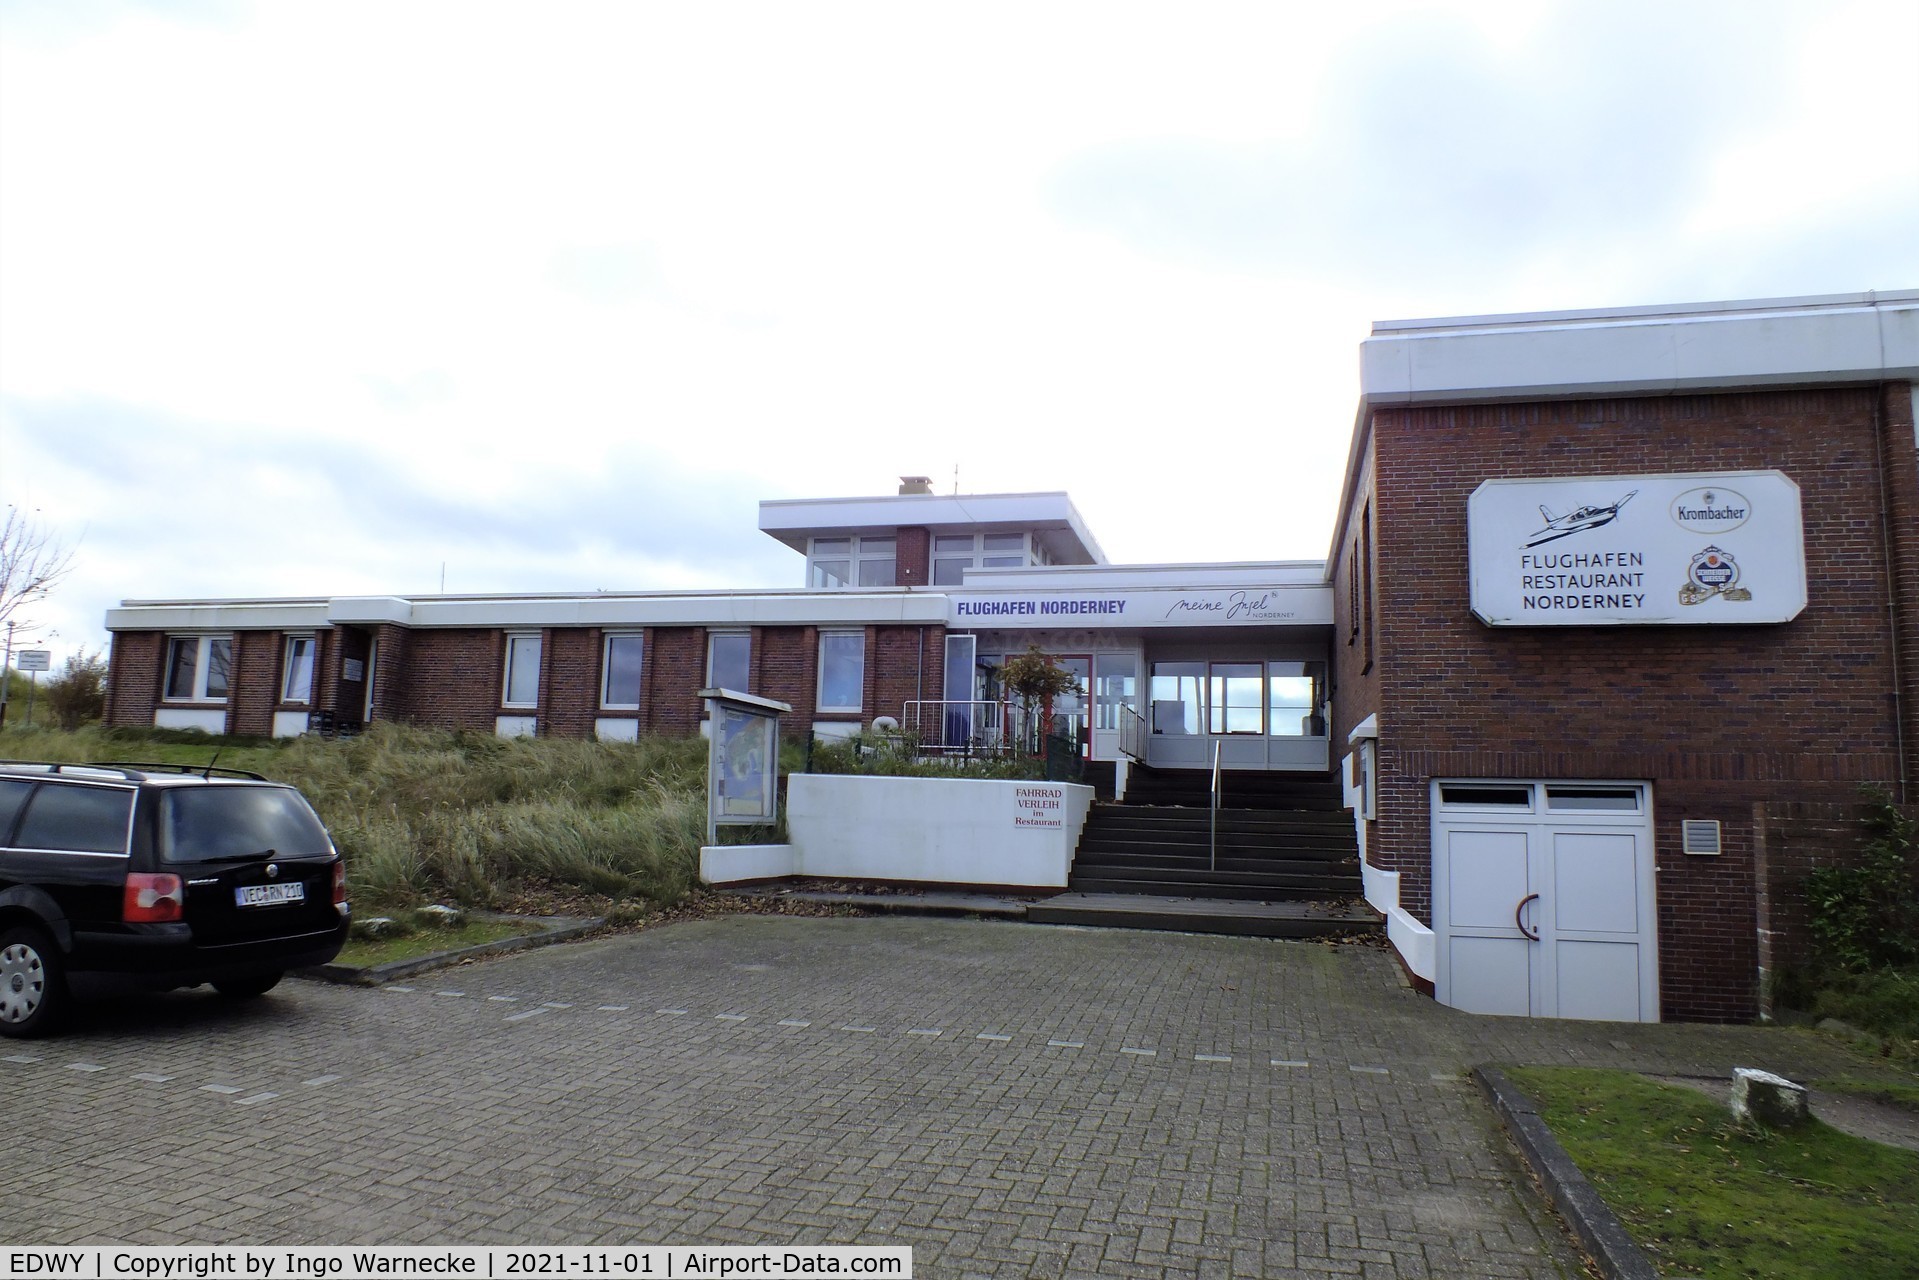 Norderney Airport, Norderney Germany (EDWY) - terminal and tower at Norderney airfield